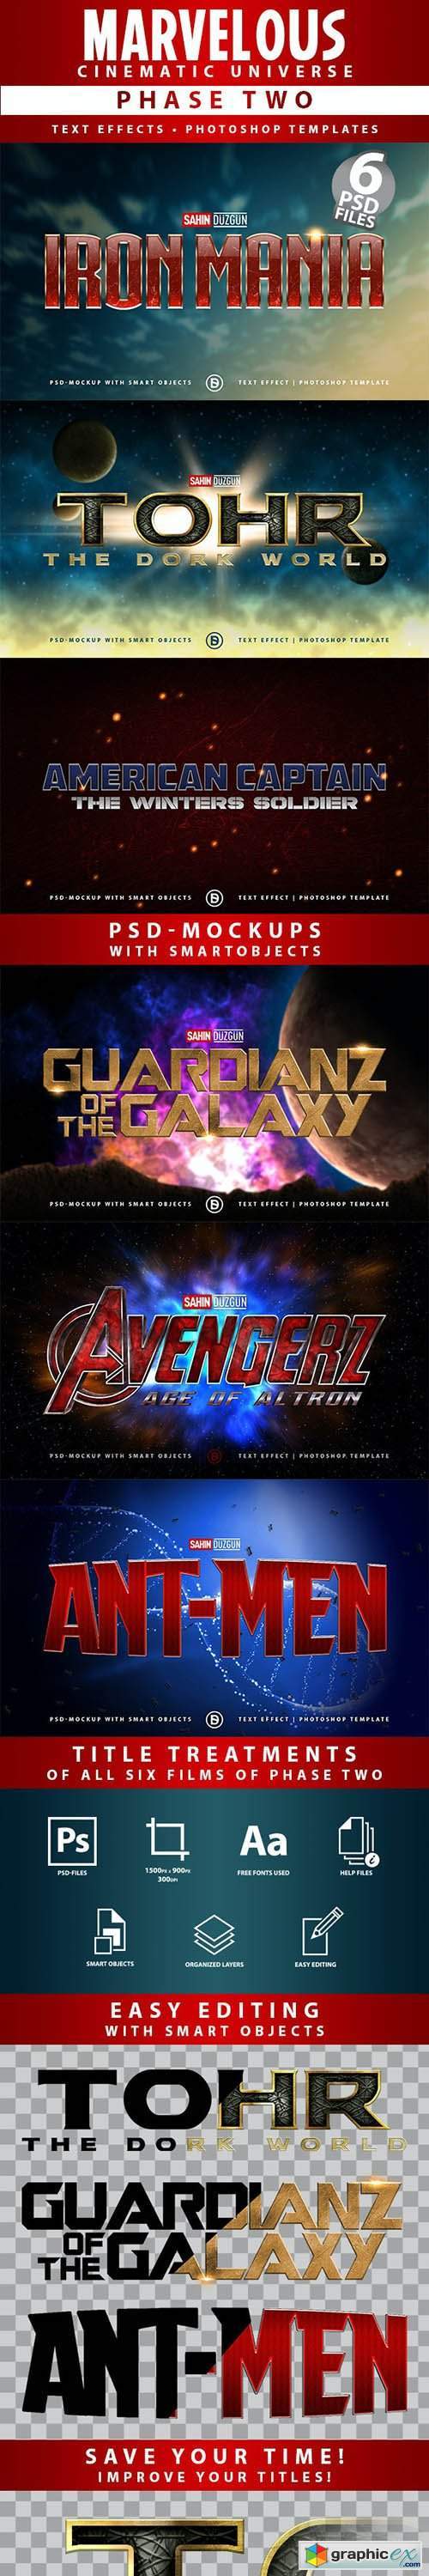 Marvelous Cinematic Universe - Phase Two